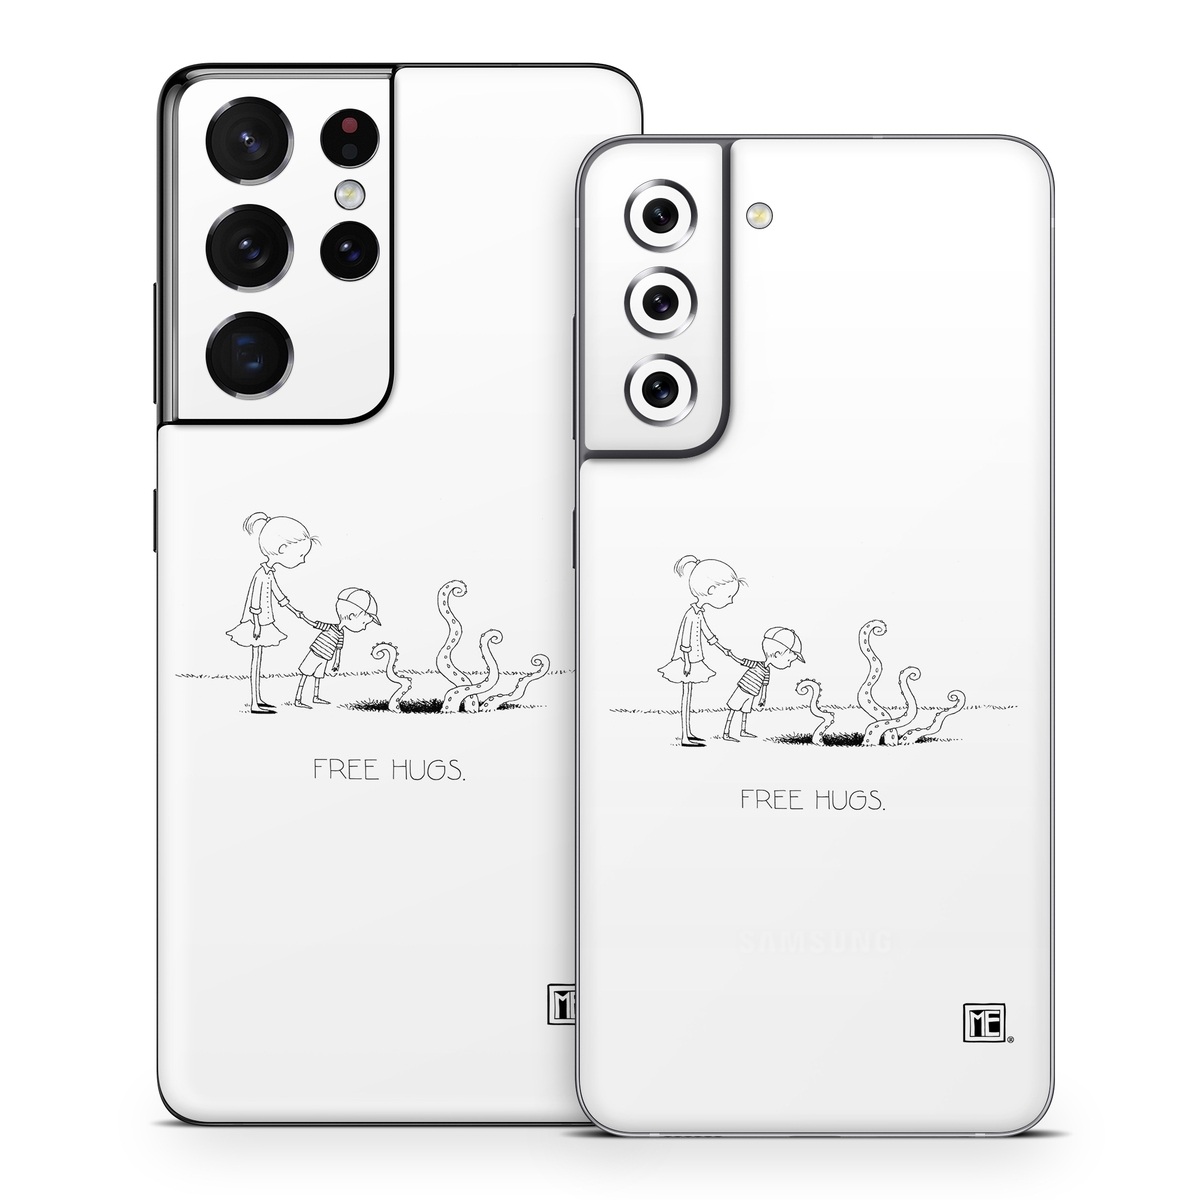 Samsung Galaxy S21 Series Skin design of Line art, Cartoon, Text, Drawing, Illustration, Coloring book, Black-and-white, Child, Art, with black, white colors